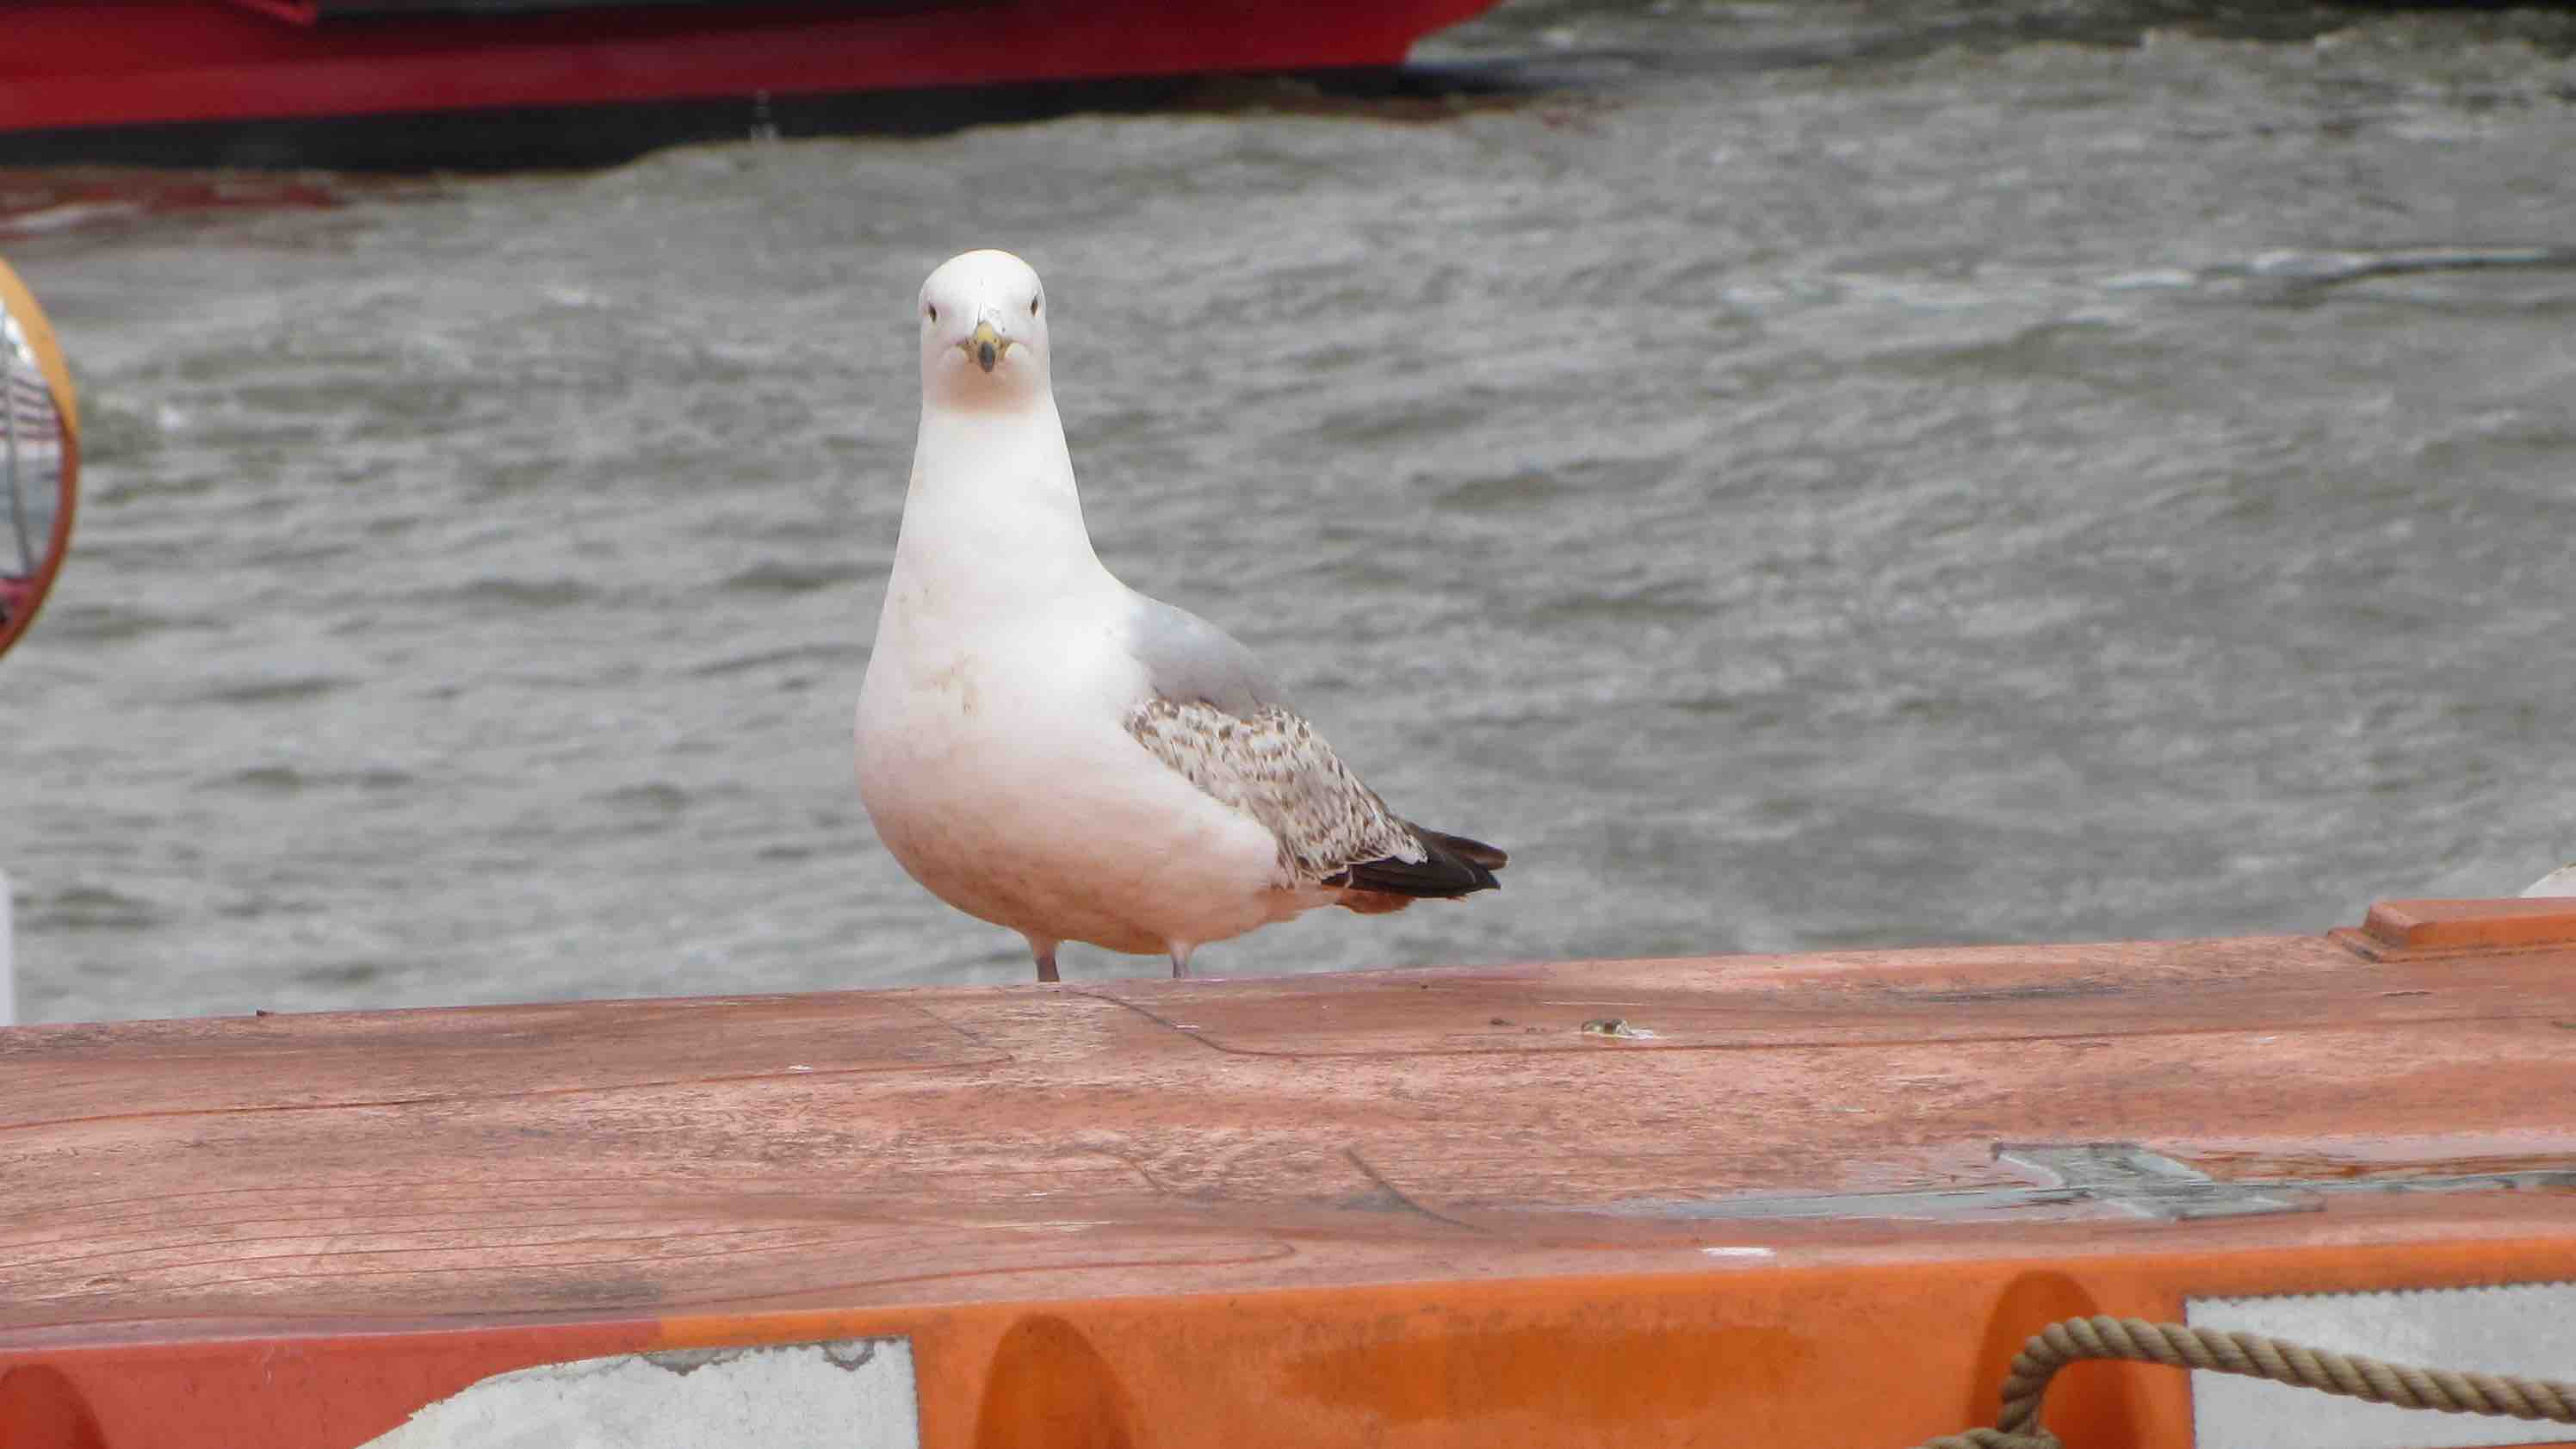 Cropped image of a seagull on an orange gunwale